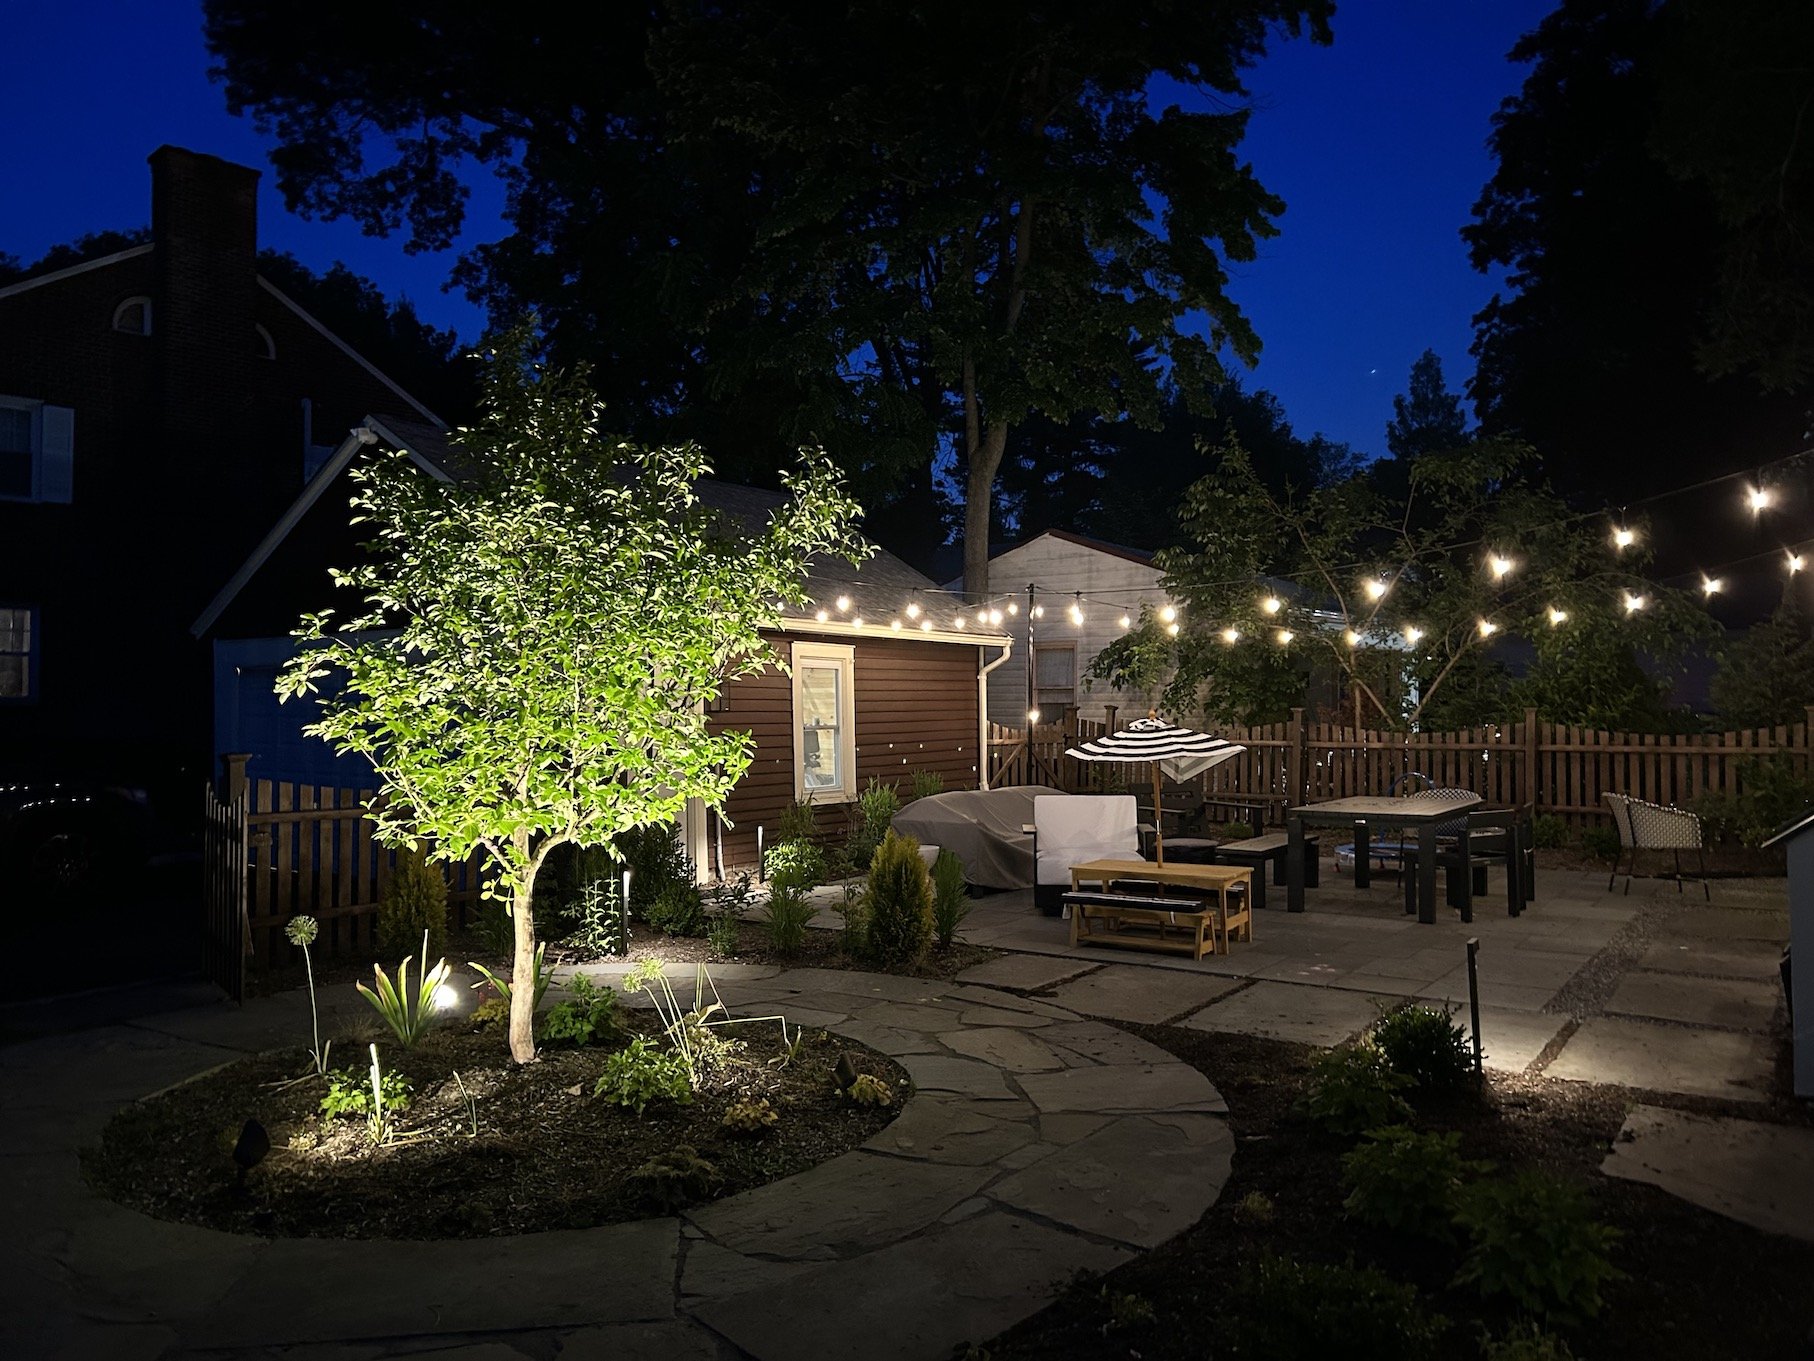 Landscape lighting with string lights on outdoor patio surrounded by trees and picnic furniture.jpg